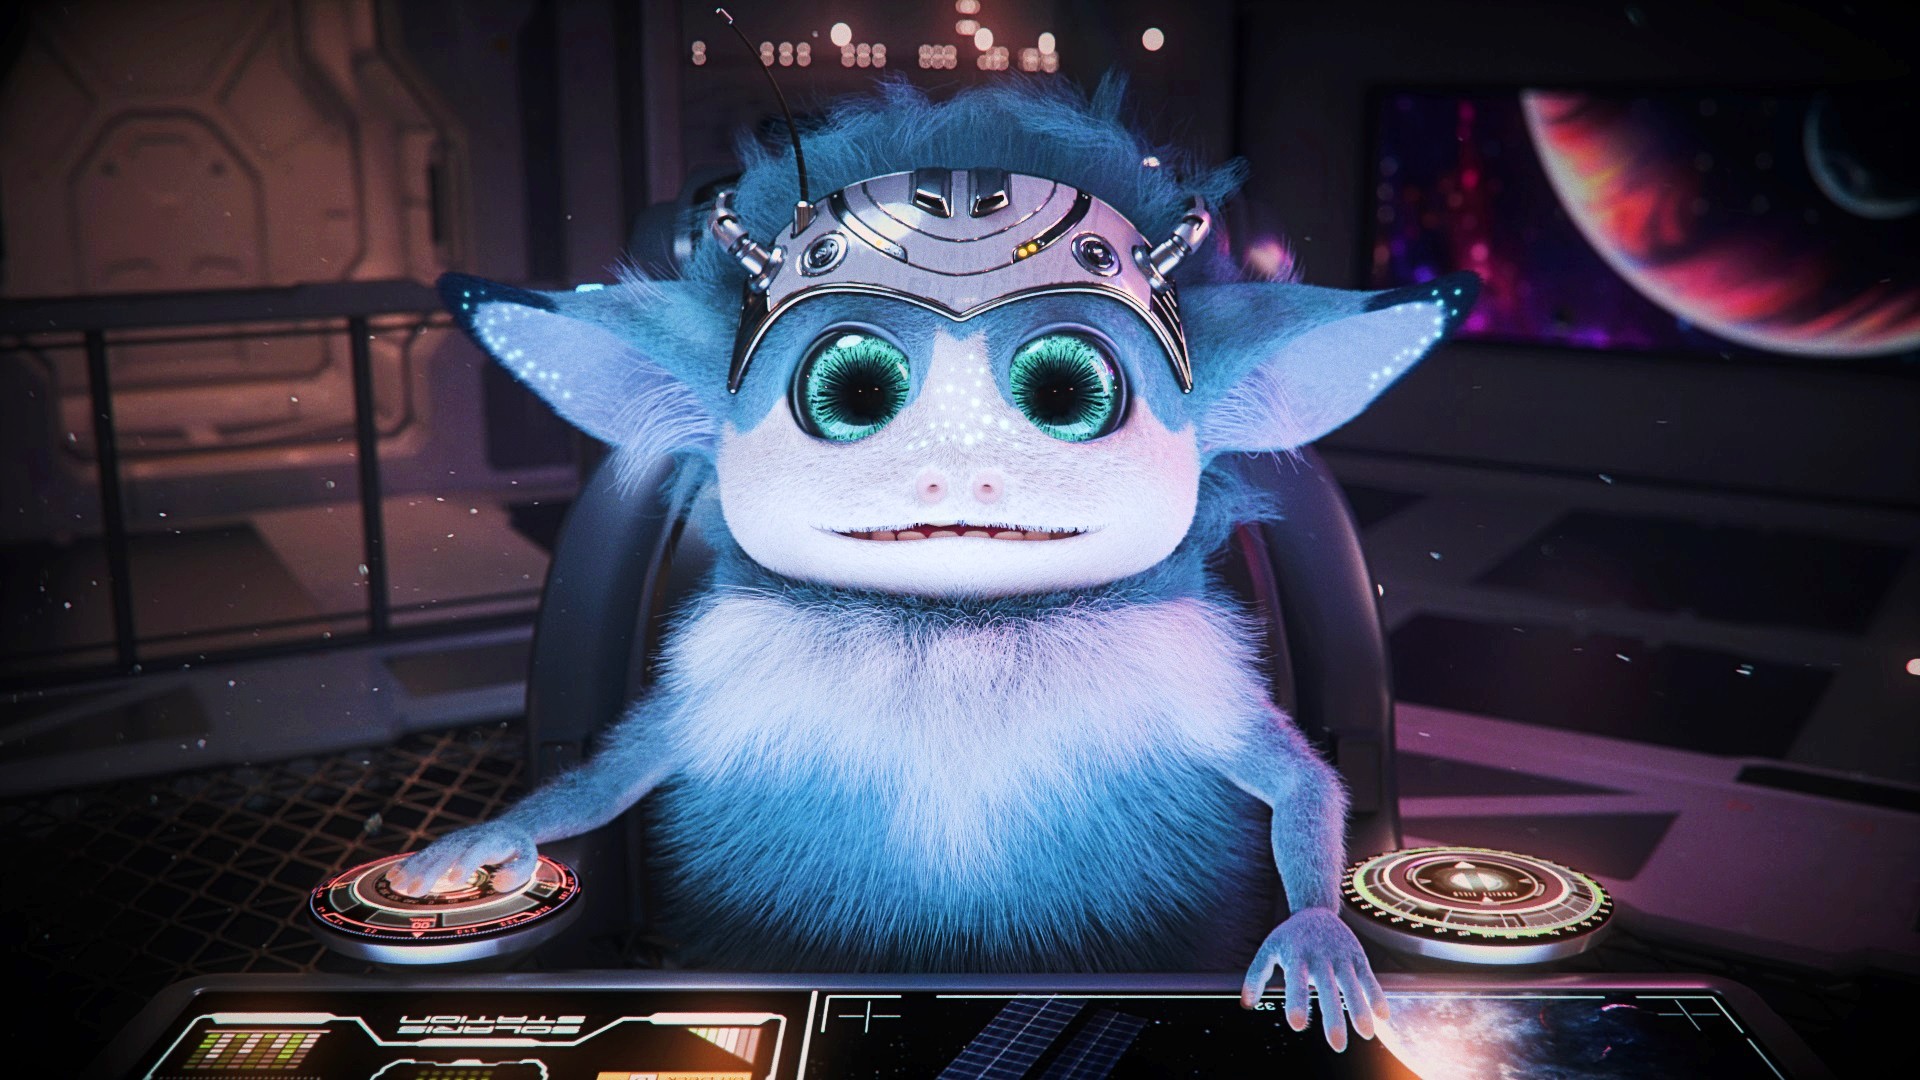 Galactic Civilizations IV's new Mimot race will conquer with cuteness